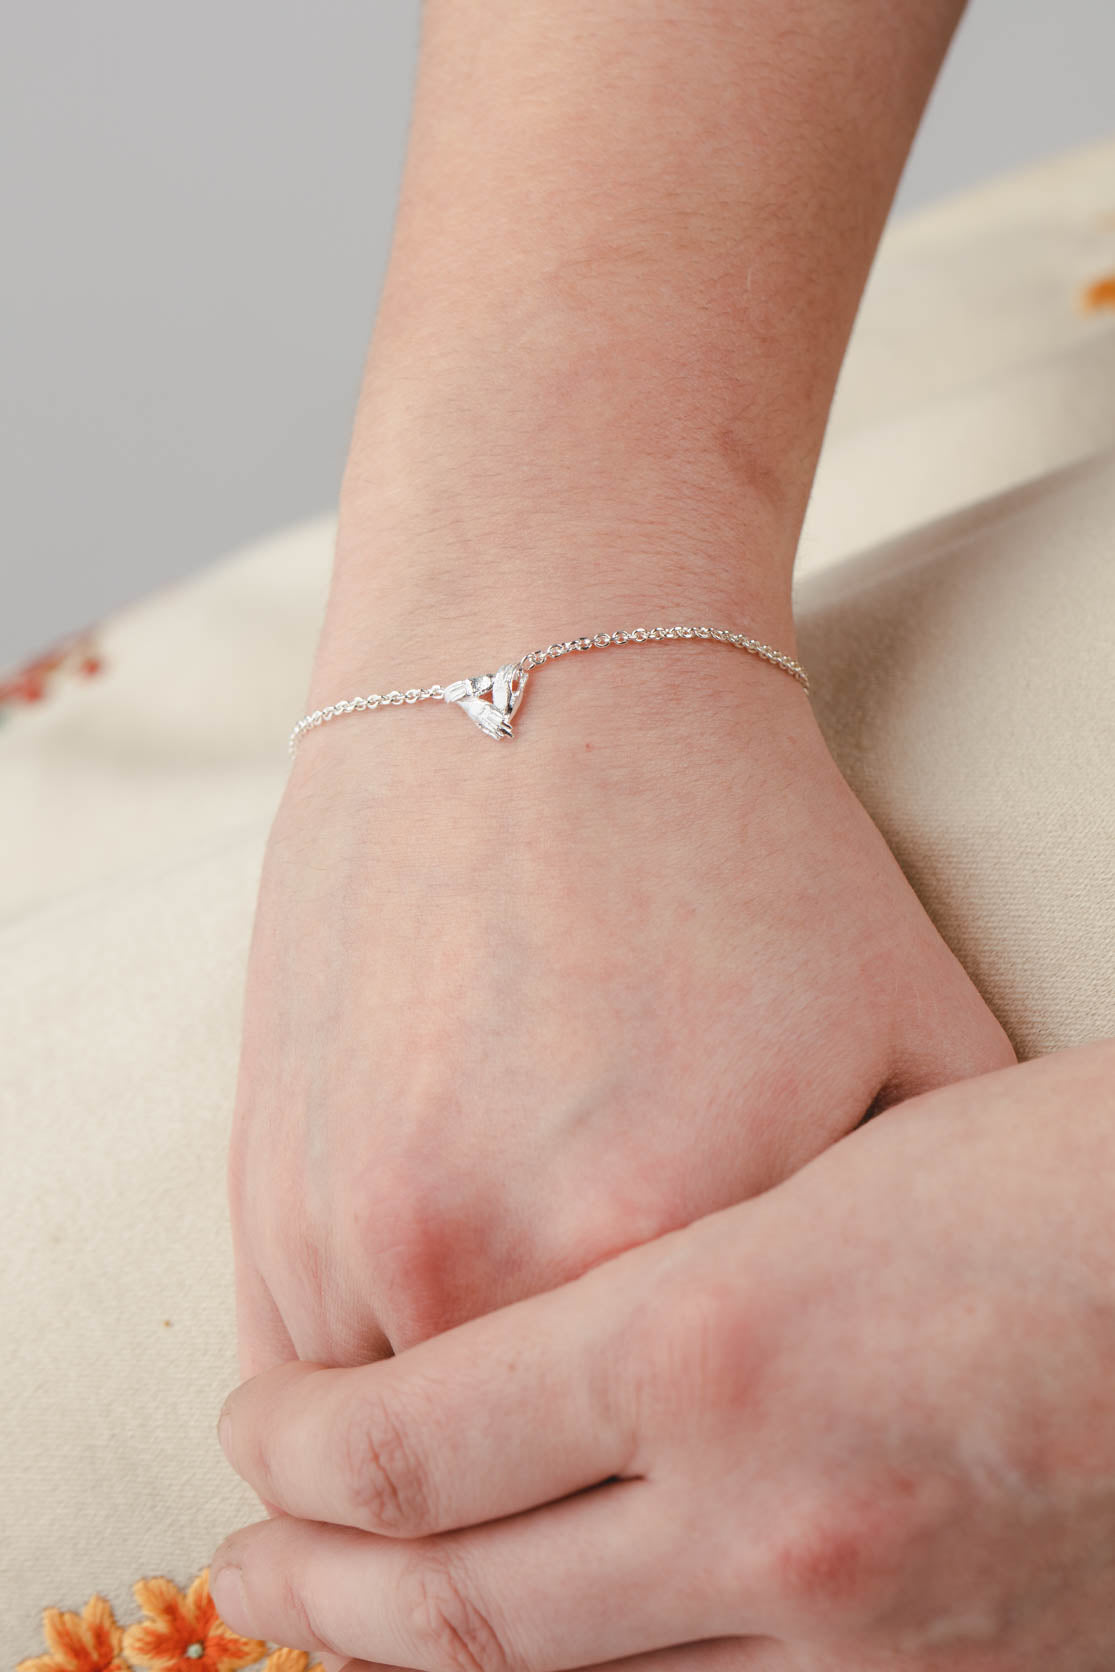 Three Supporting Hands Bracelet